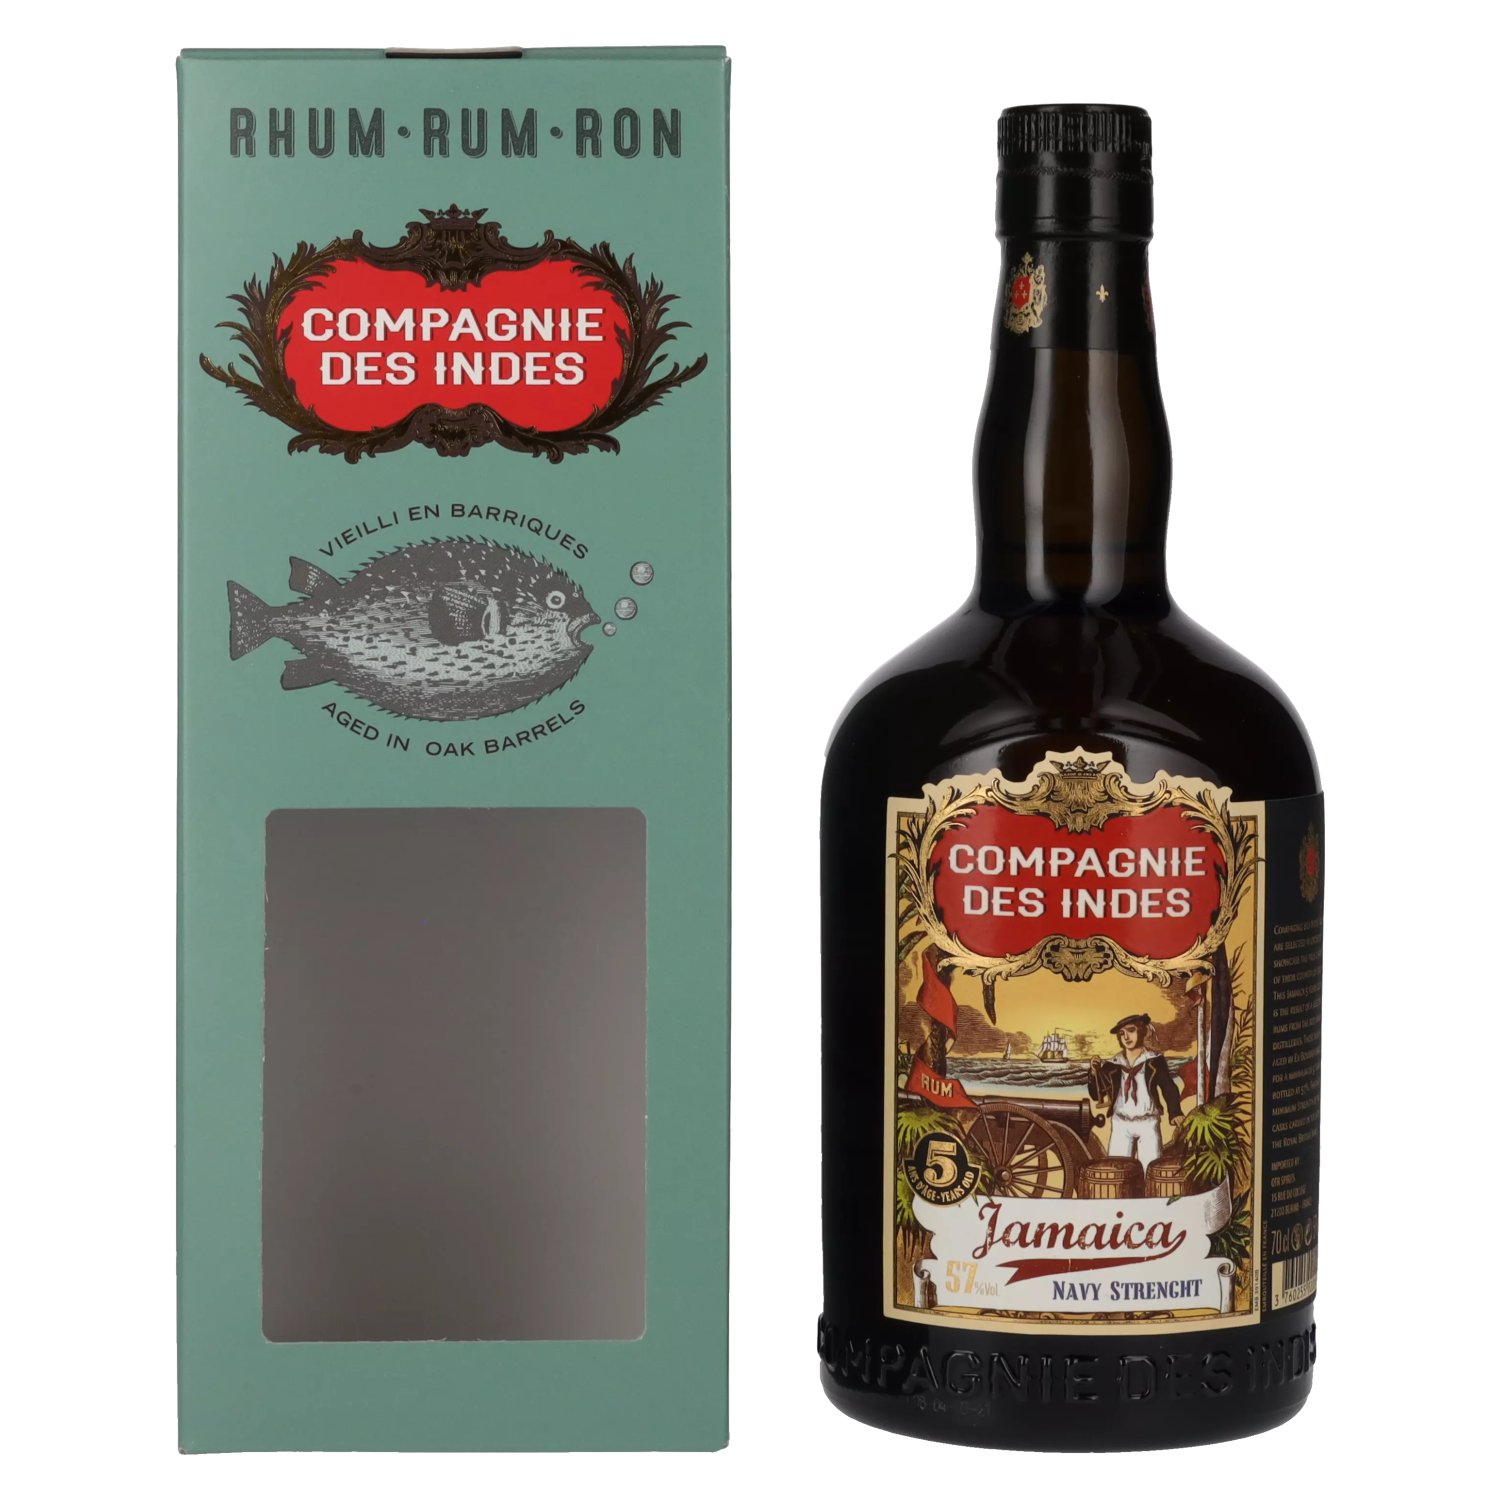 Compagnie des Indes Jamaica Rum Navy Strength 5 Years Old 57% Vol. 0,7l in  Giftbox